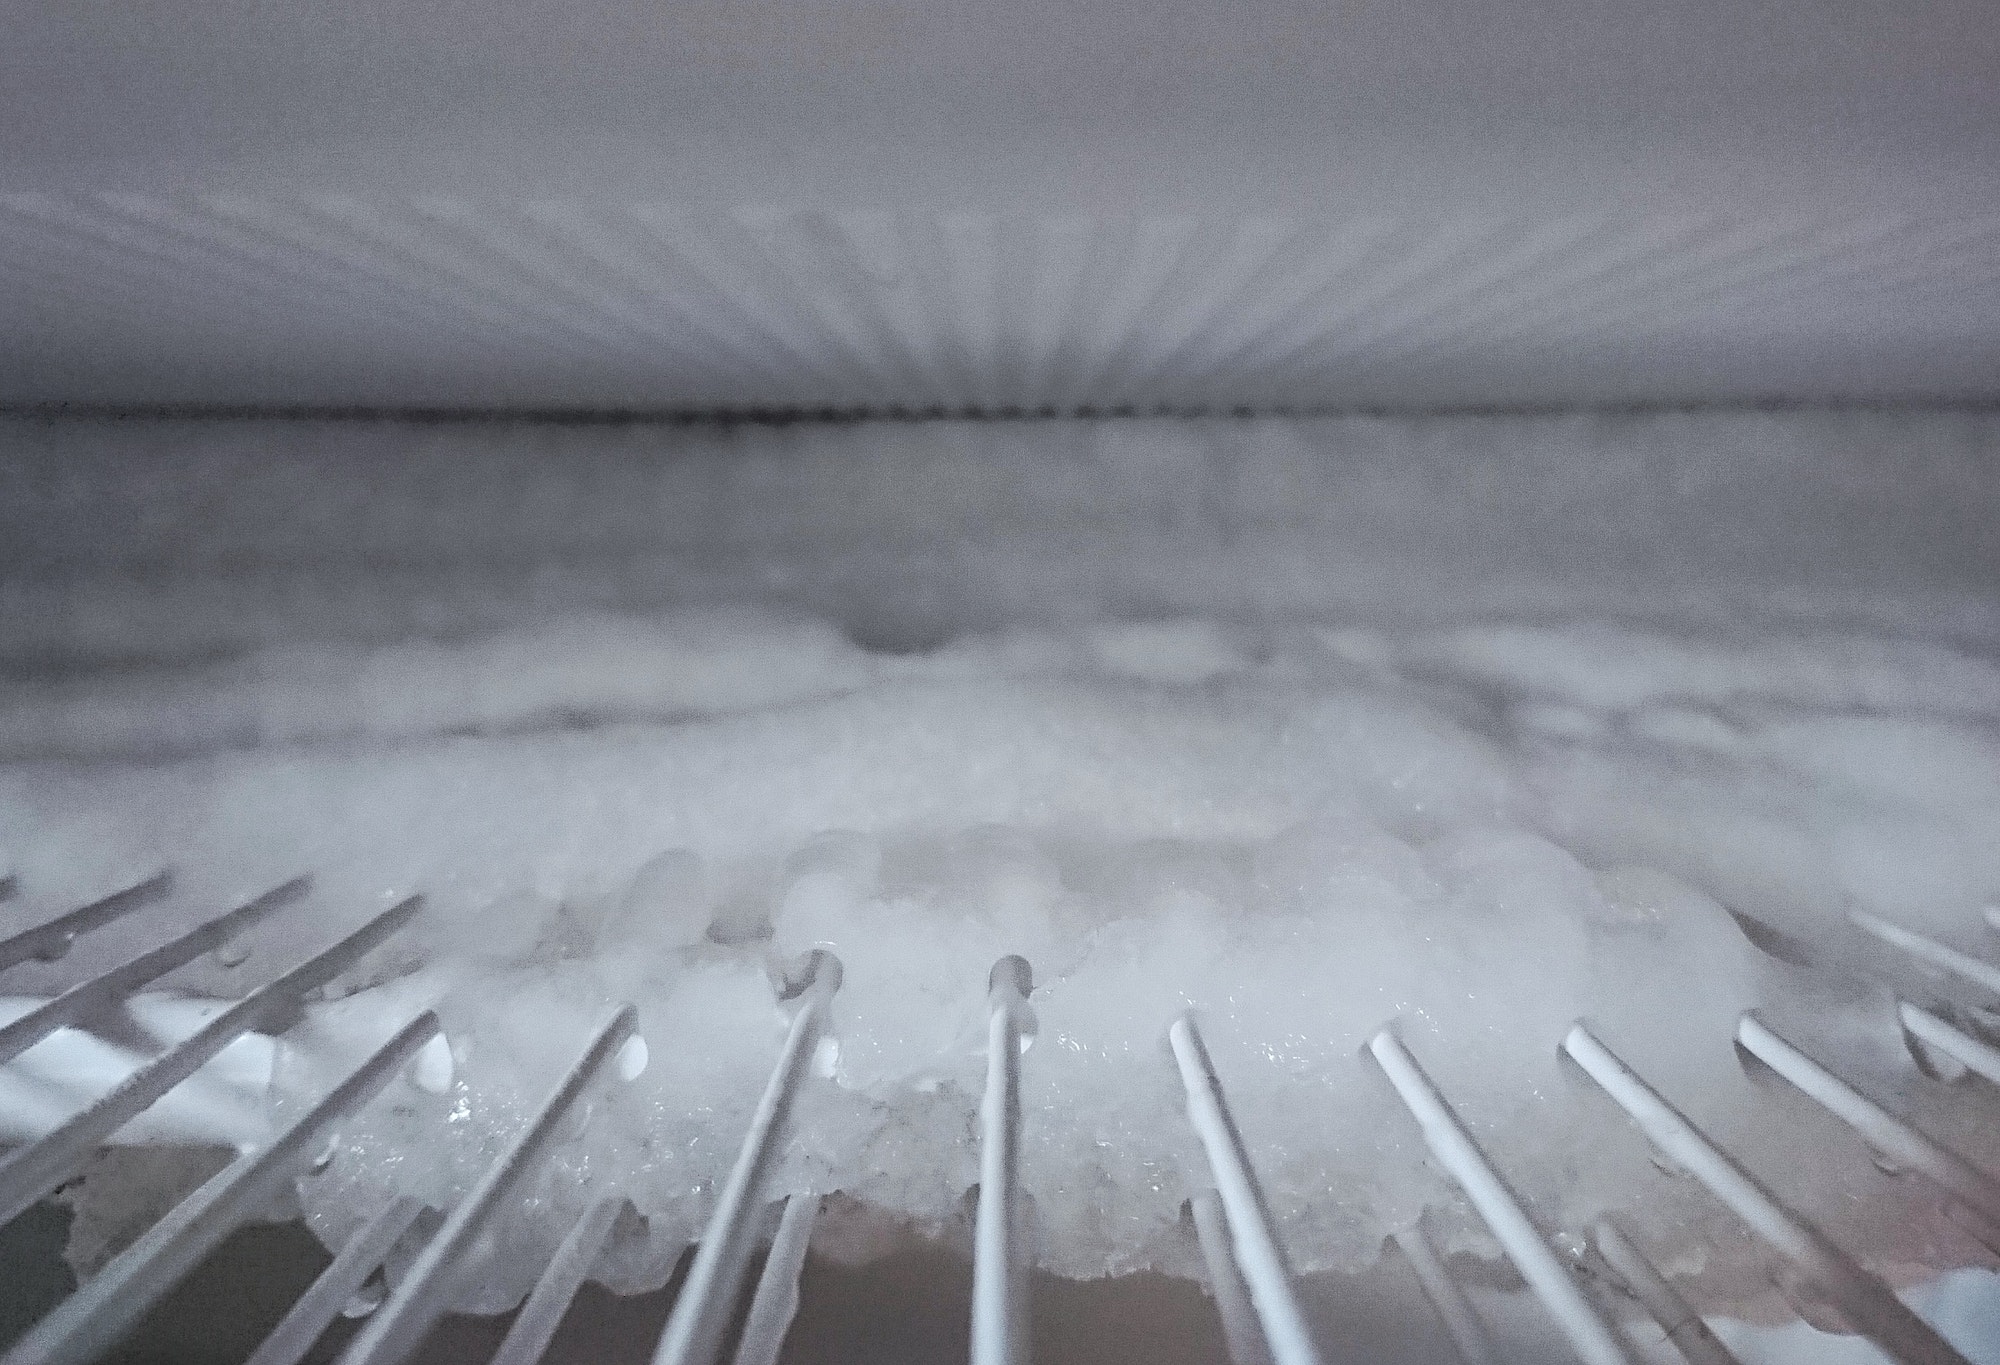 Defrost the freezer and refrigerator. Housekeeping, home keeping, house work, ice and frost, kitchen